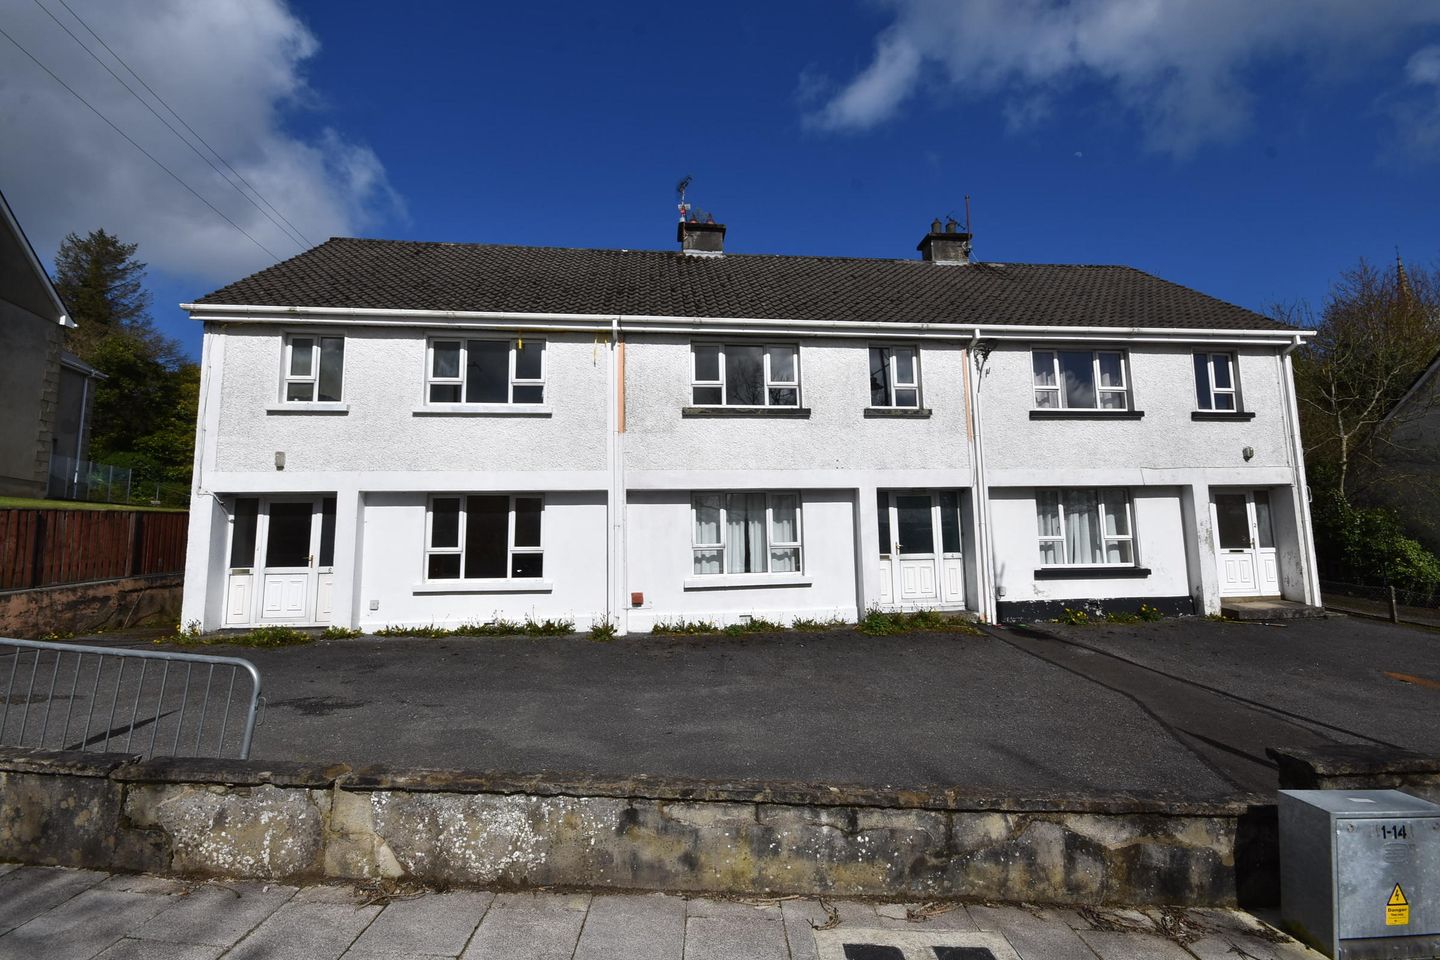 6 College Row, Letterkenny, Co. Donegal, F92VWX6